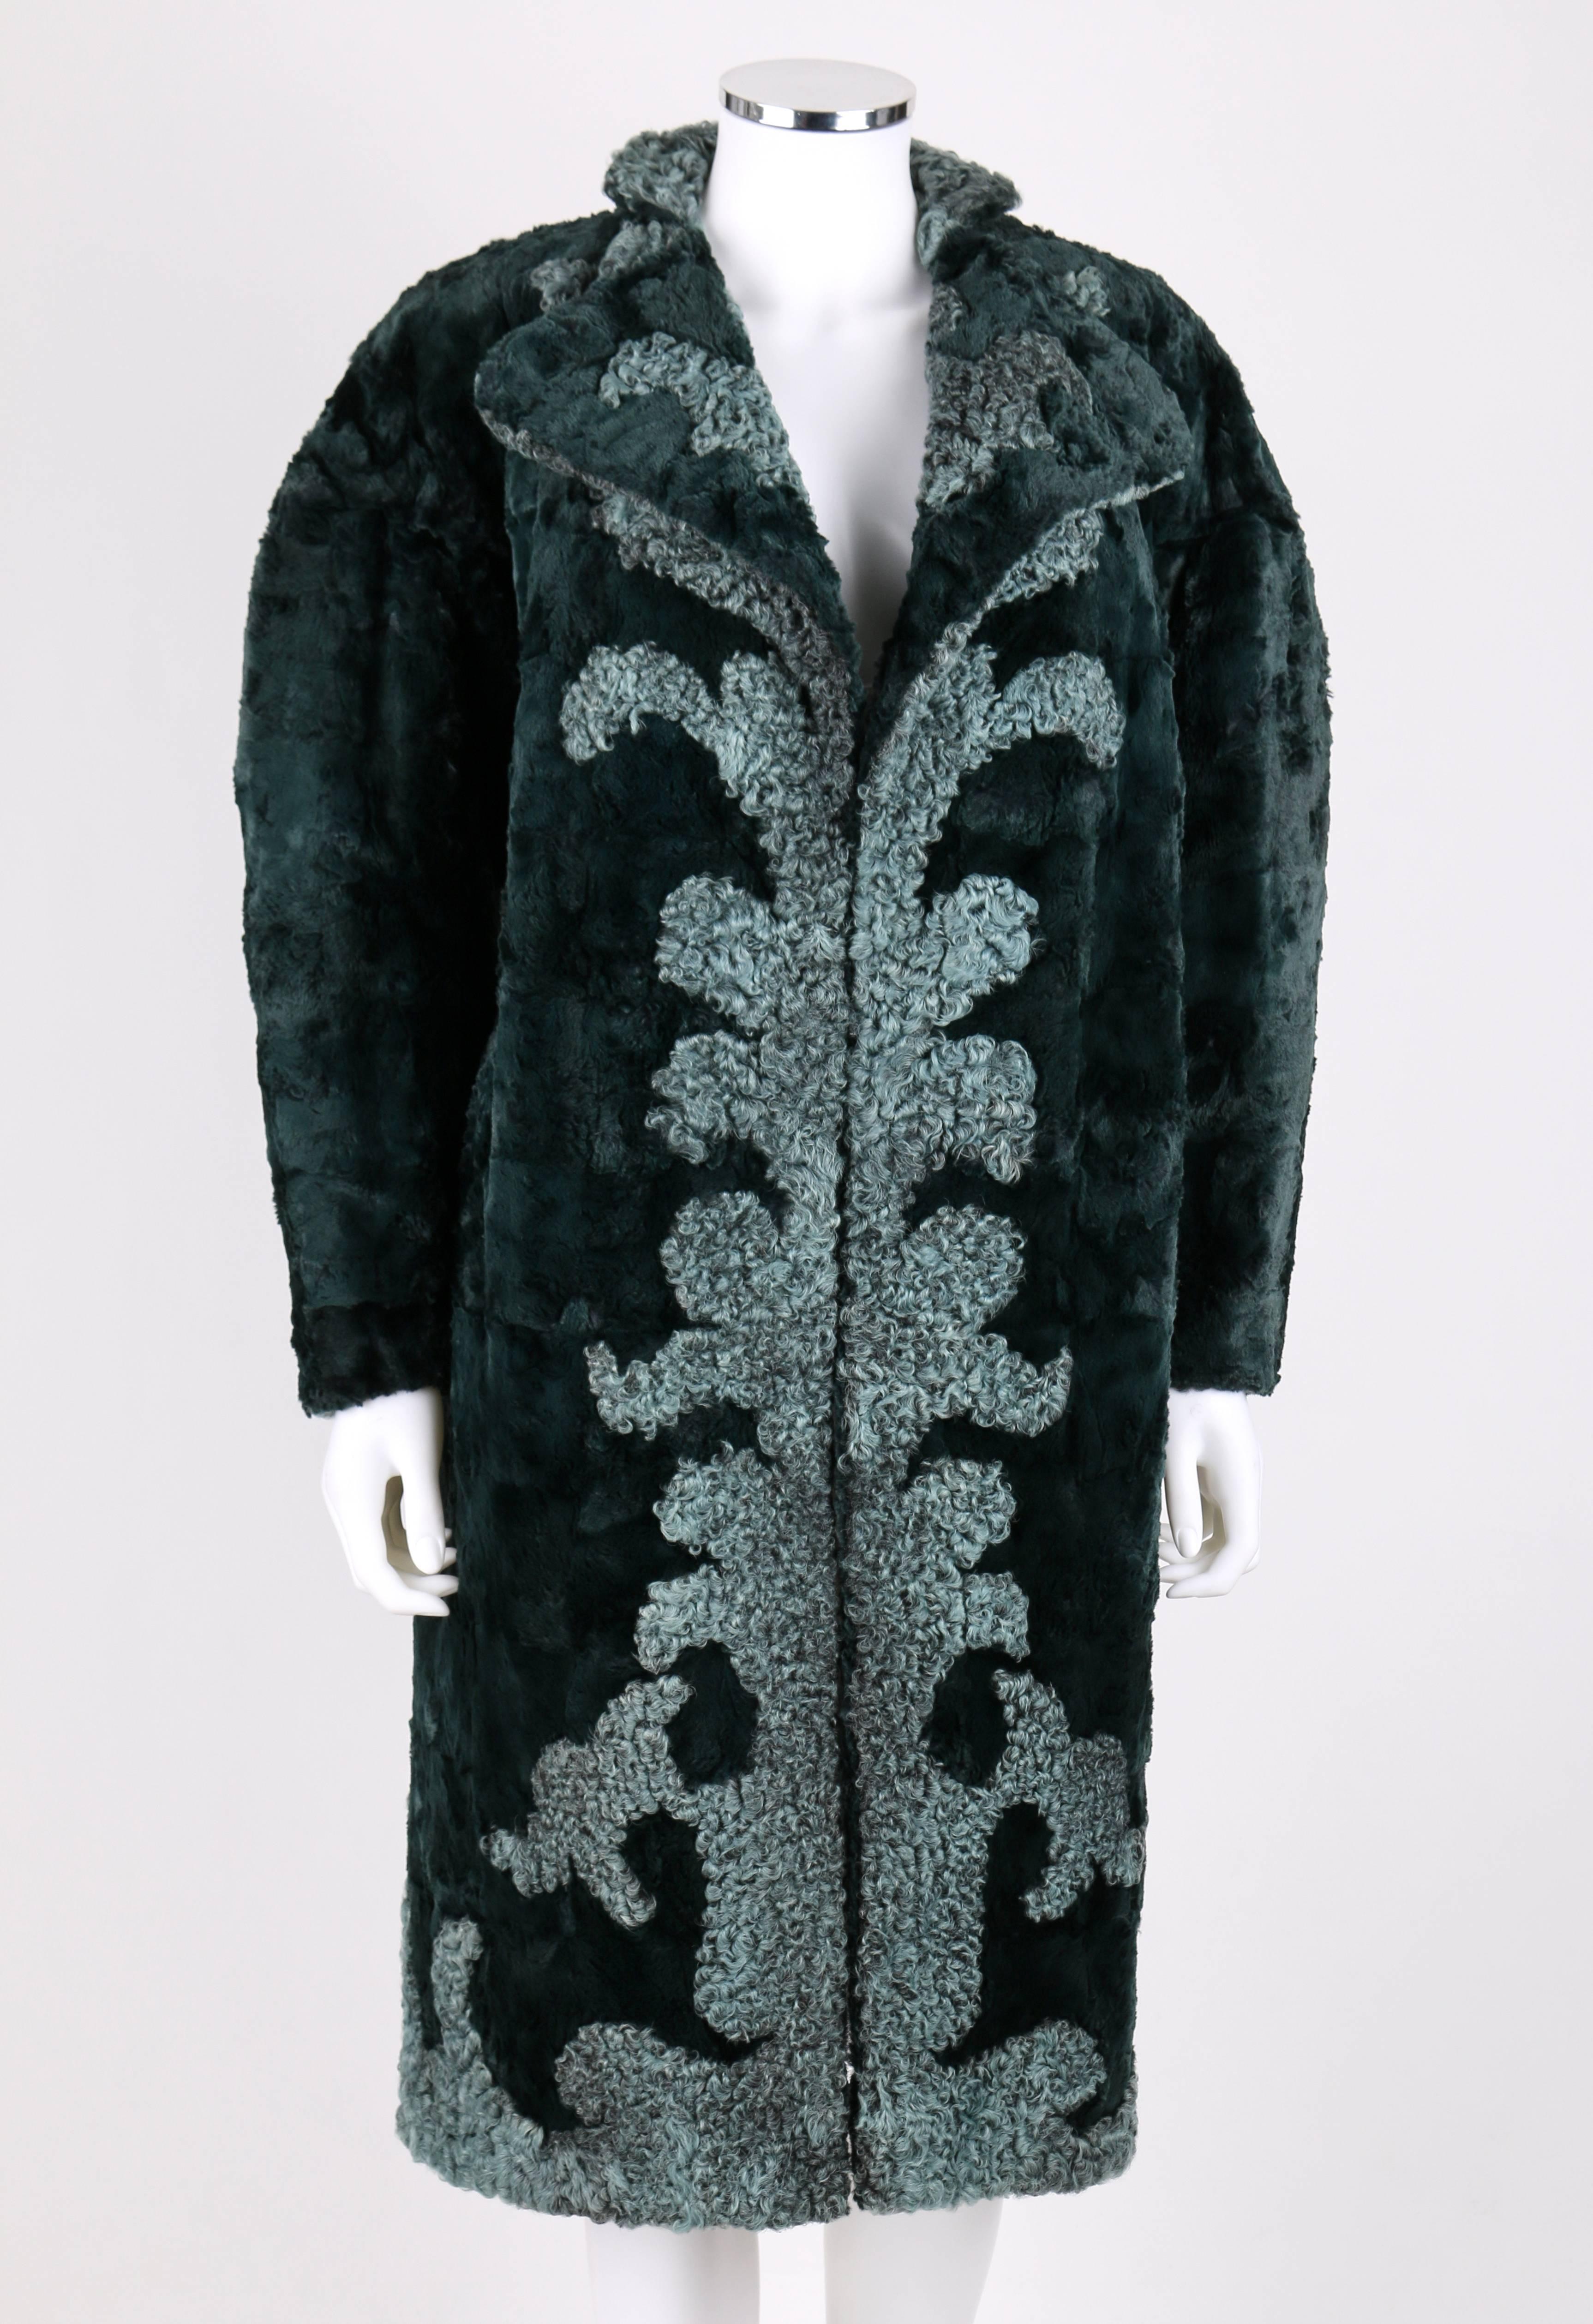 Fendi c.1980's dark green dyed chinchilla and light gray-green astrakhan / persian lamb fur coat. Genuine chinchilla fur with astrakhan / persian lamb fur filigree design. Long leg o' mutton style sleeves. Notched lapel collar. Two front inseam